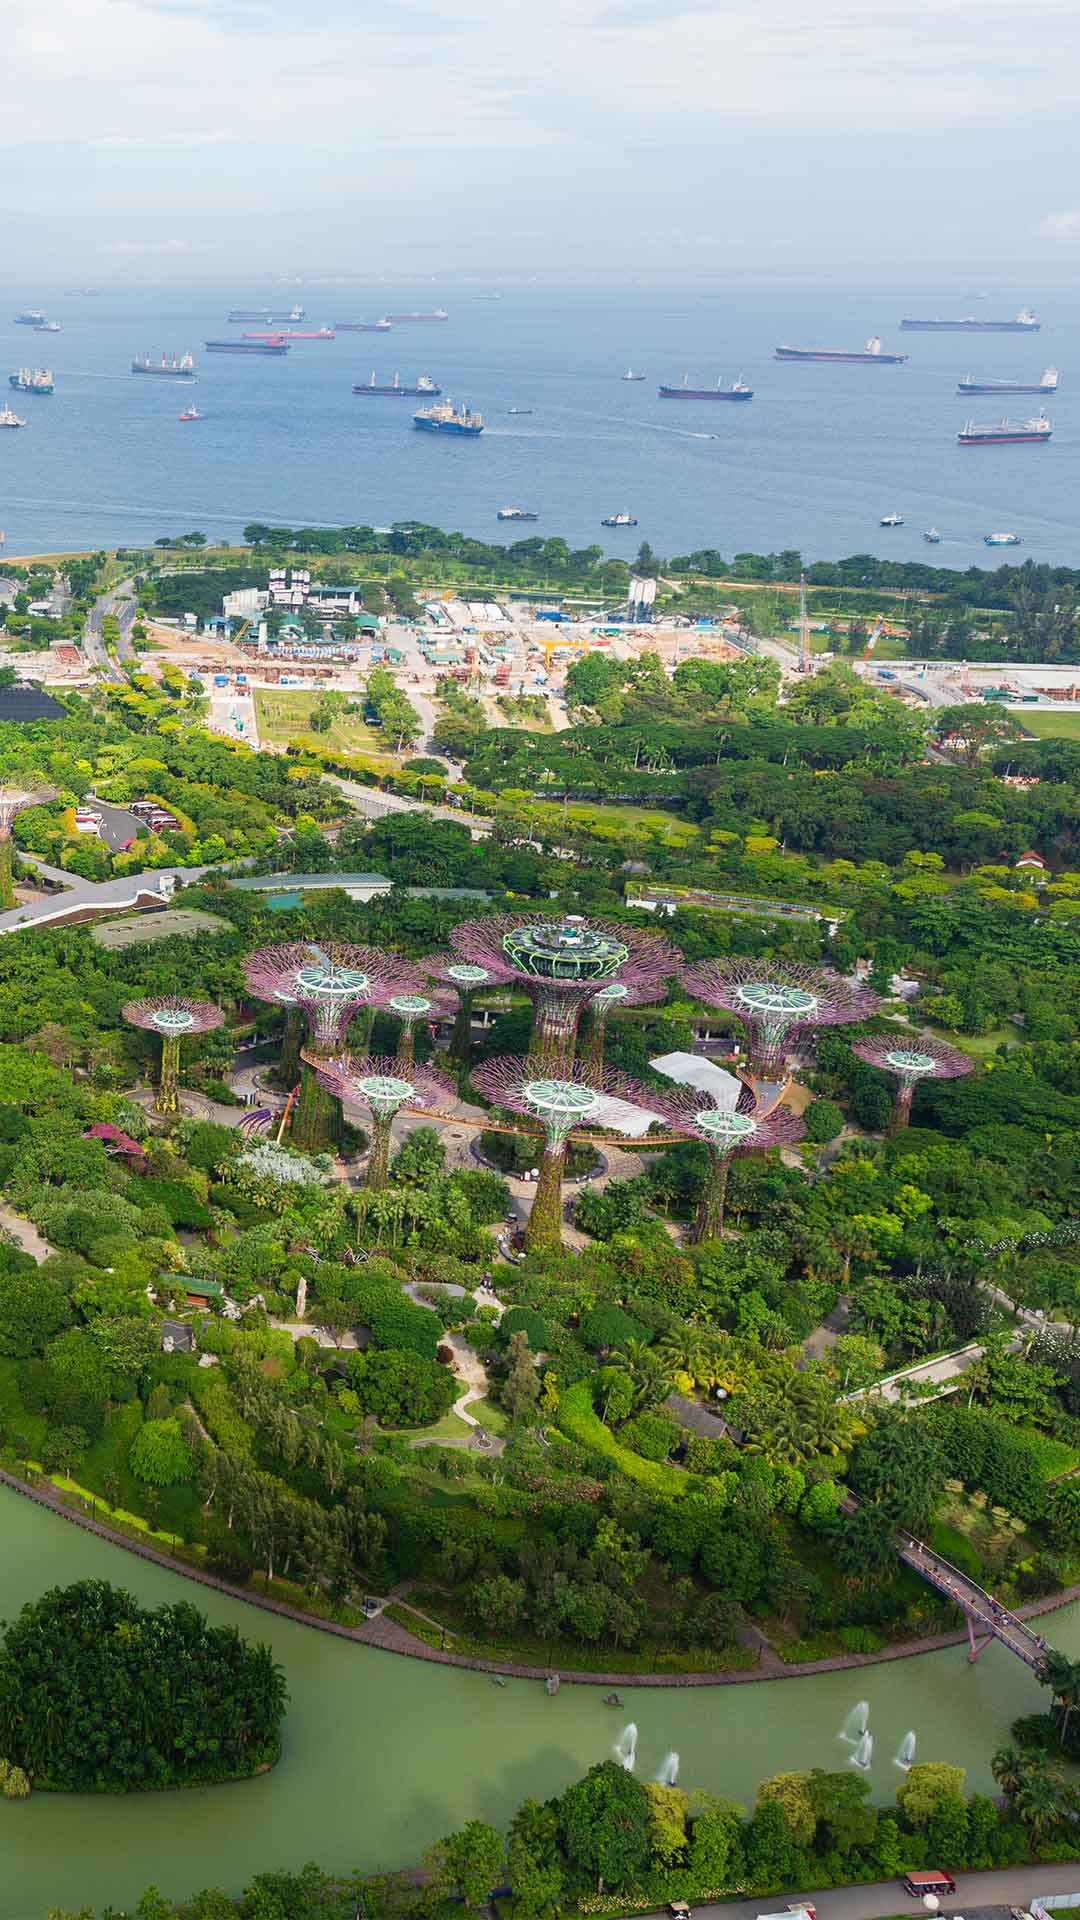 Top view of the Supertrees at Gardens by the Bay in Singapore, from the rooftop of Marina Bay Sands